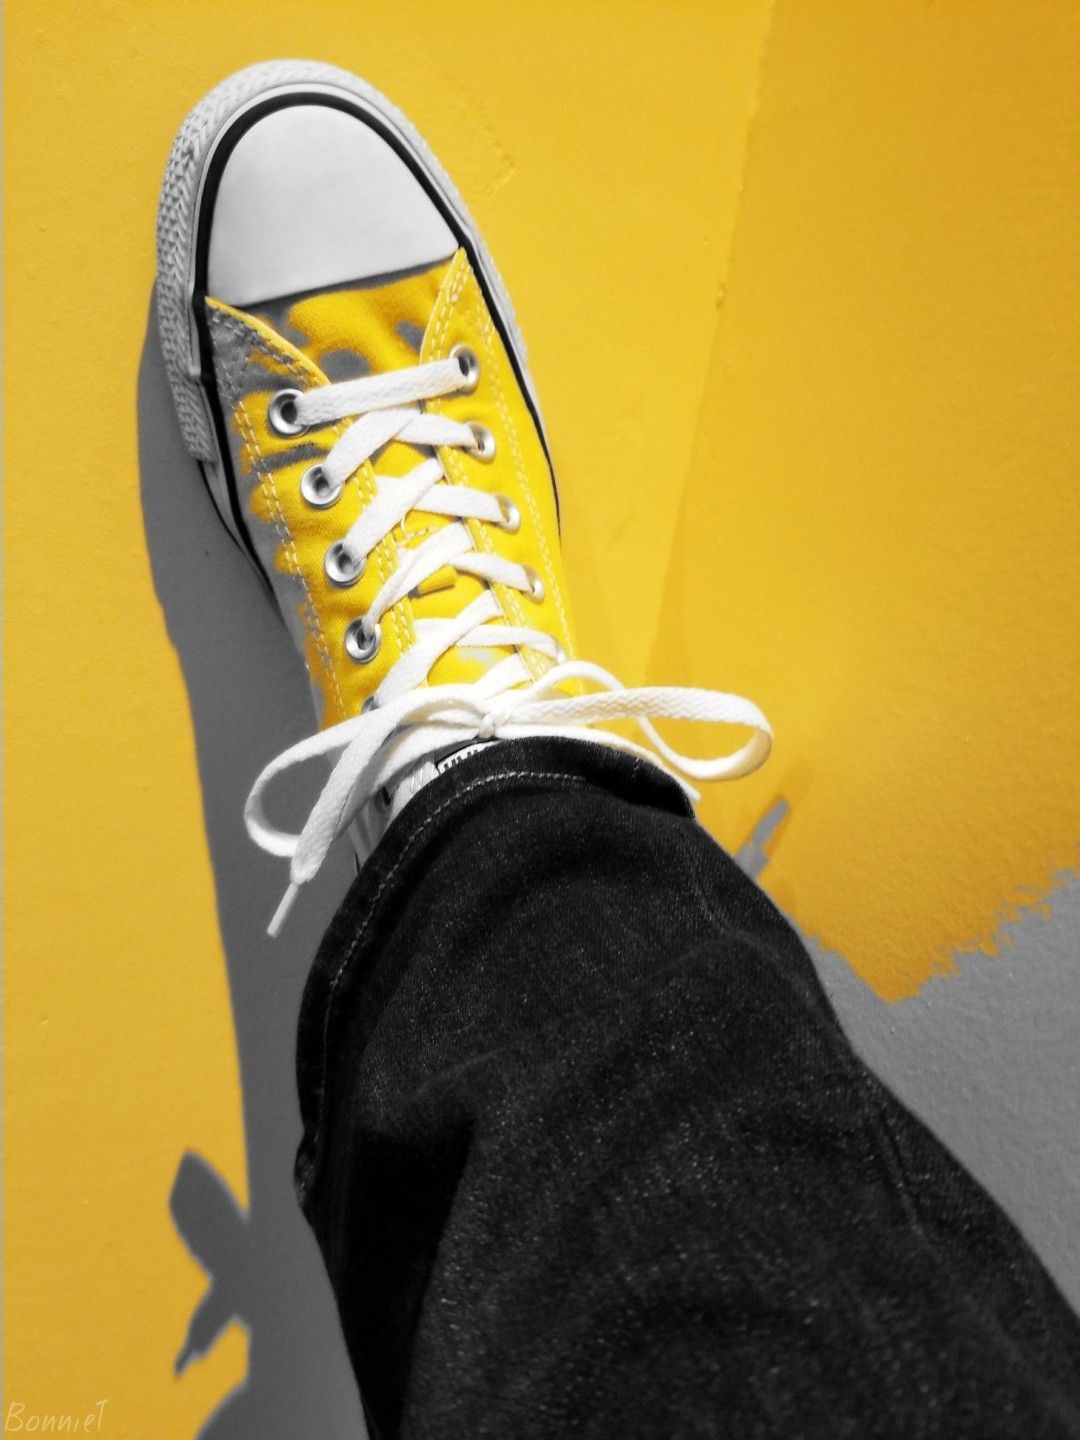 A person wearing yellow sneakers standing on top of something - Shoes